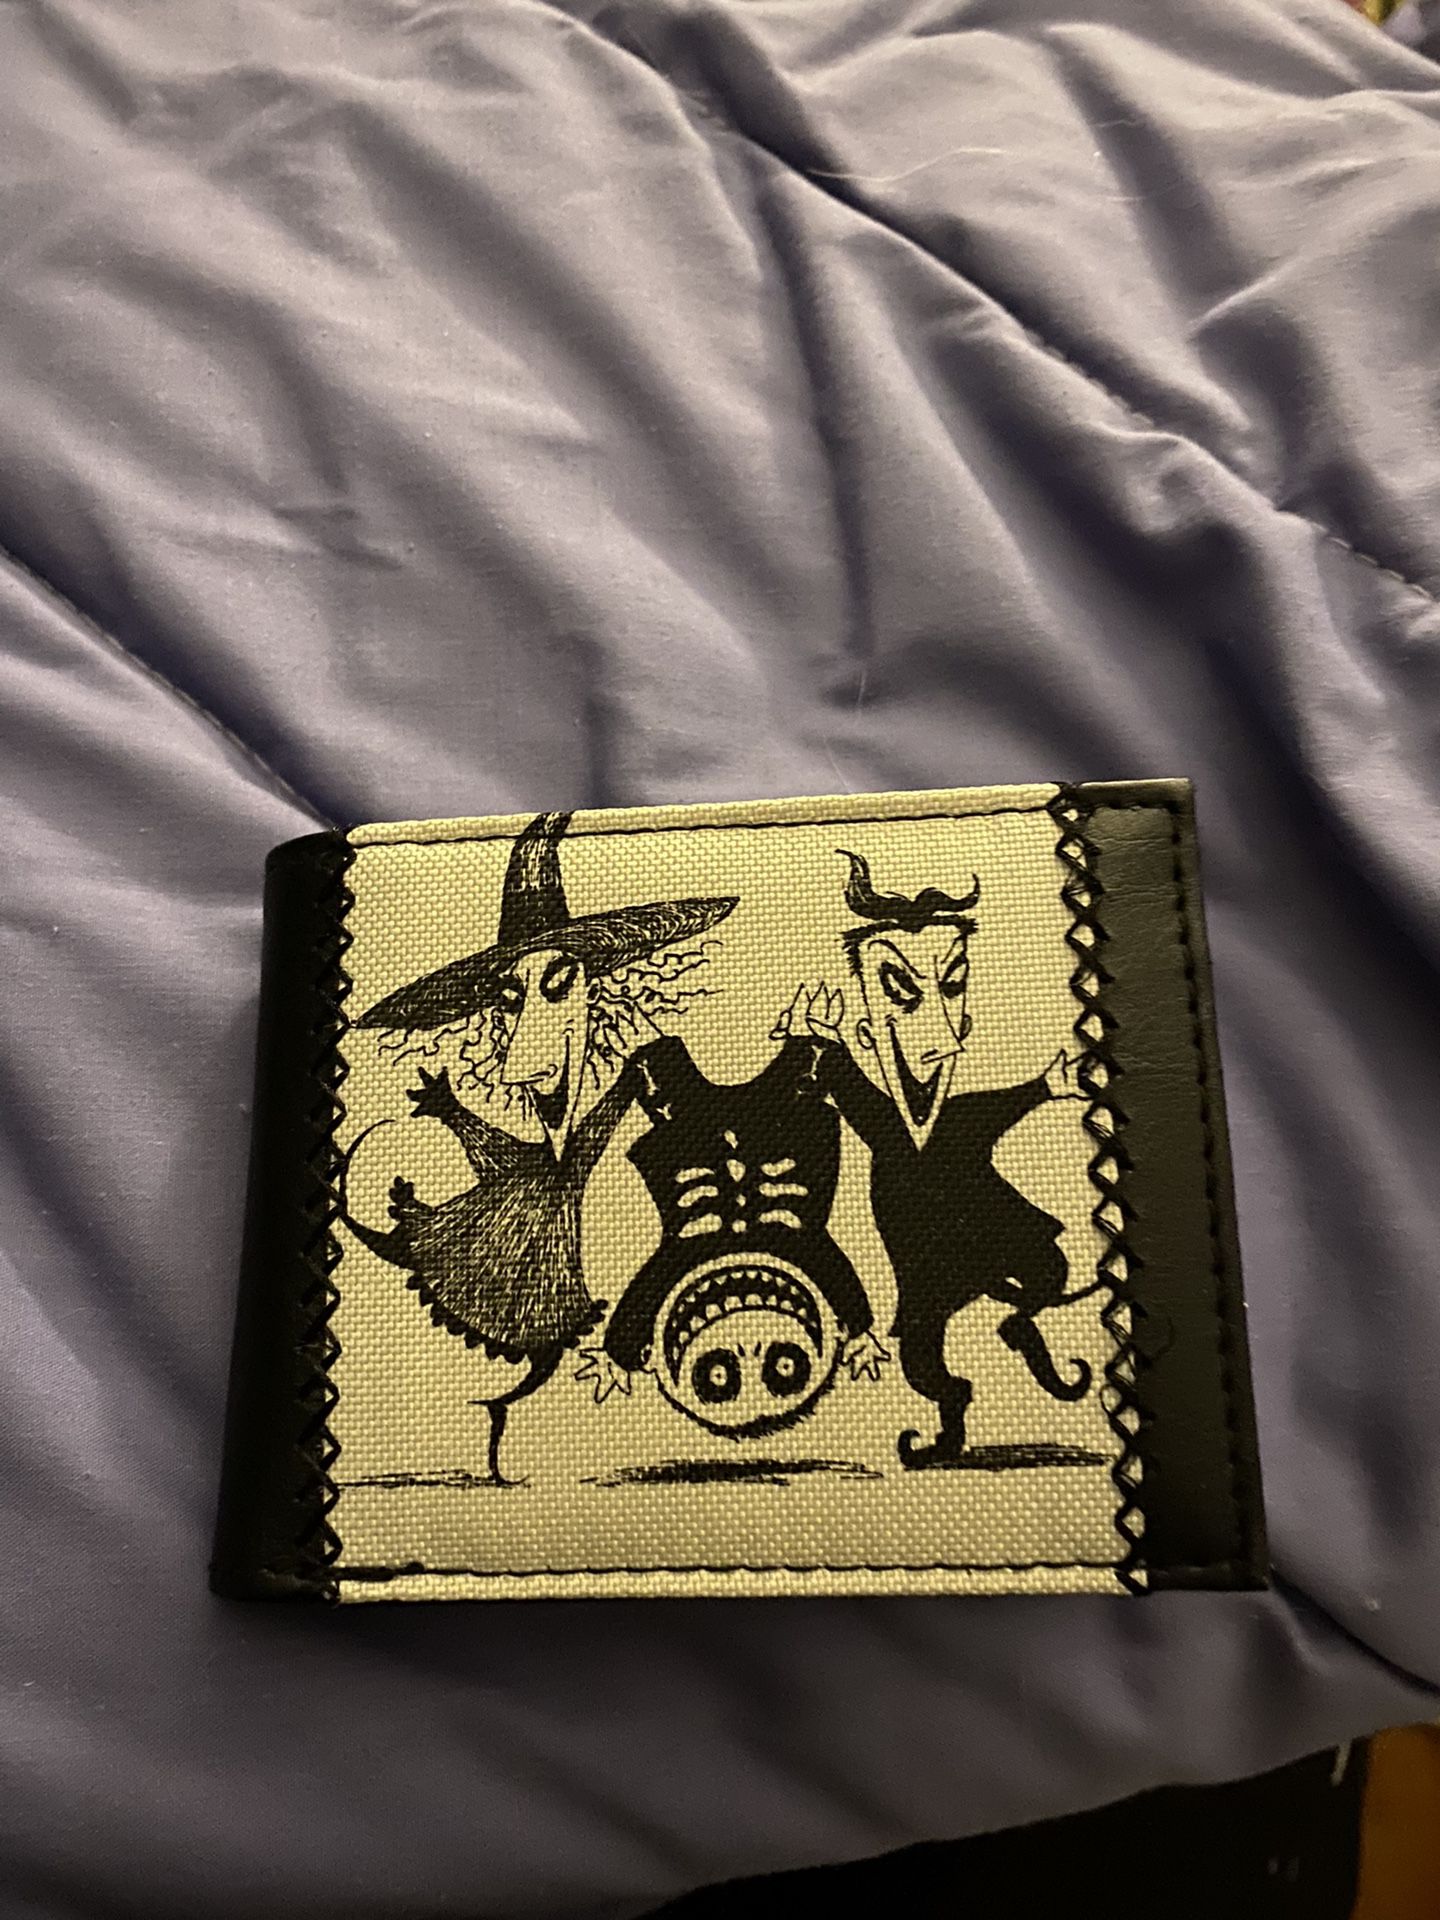 The Nightmare Before Christmas Lock, Shock And Barrel Wallet